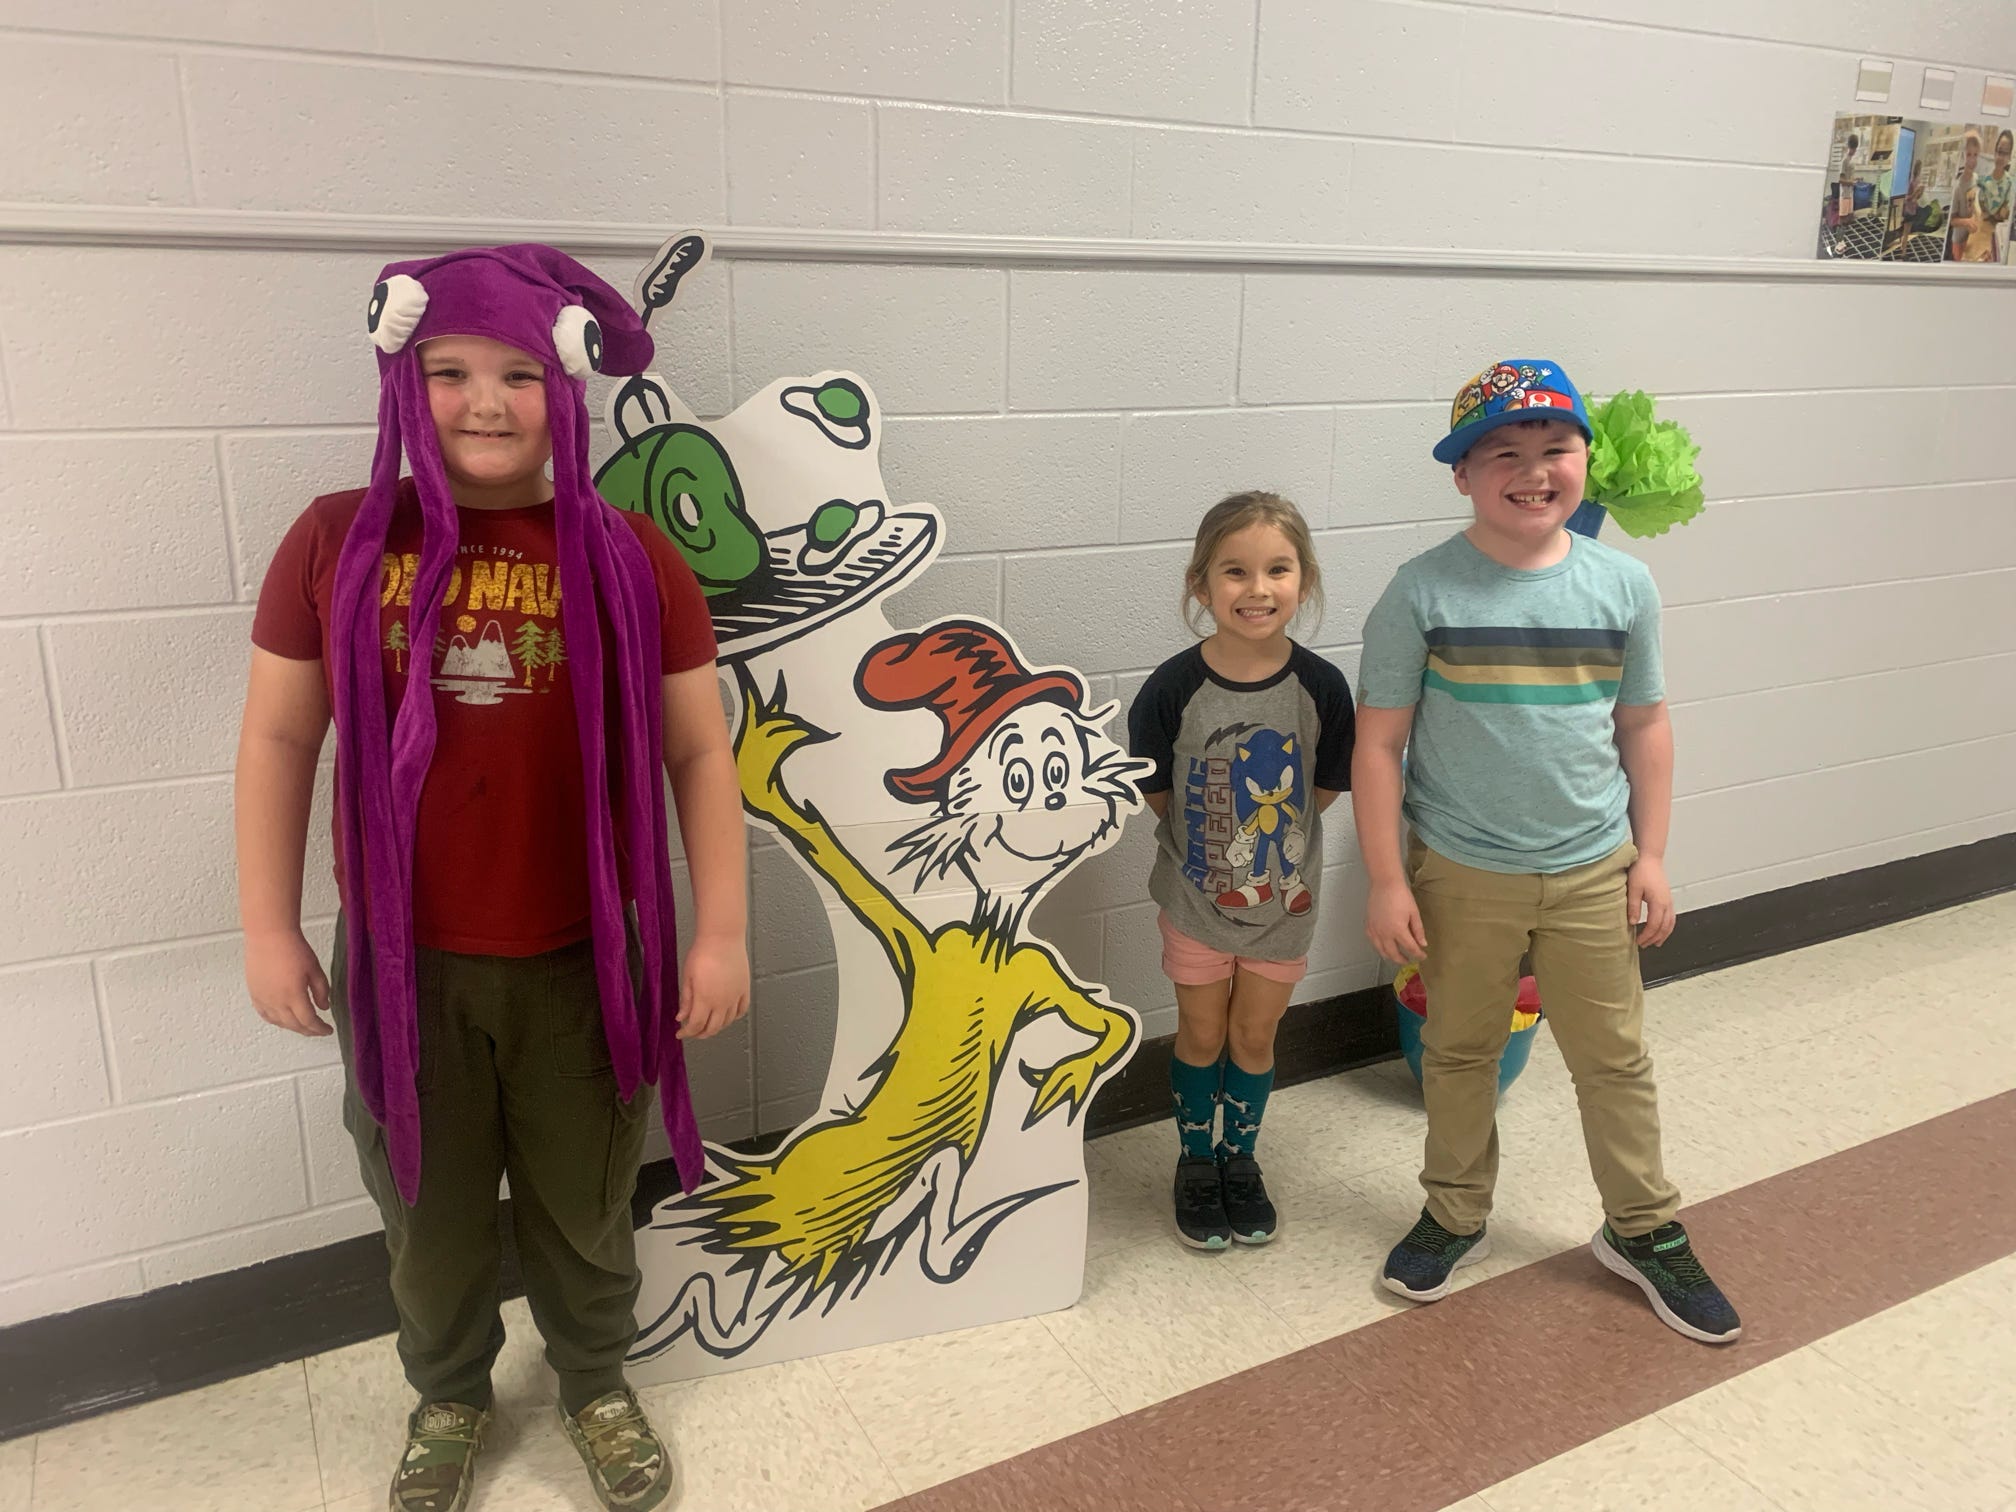 The Cat in the Hat Thursday: Students wore crazy hats or crazy hair to celebrate Read Across America Week.